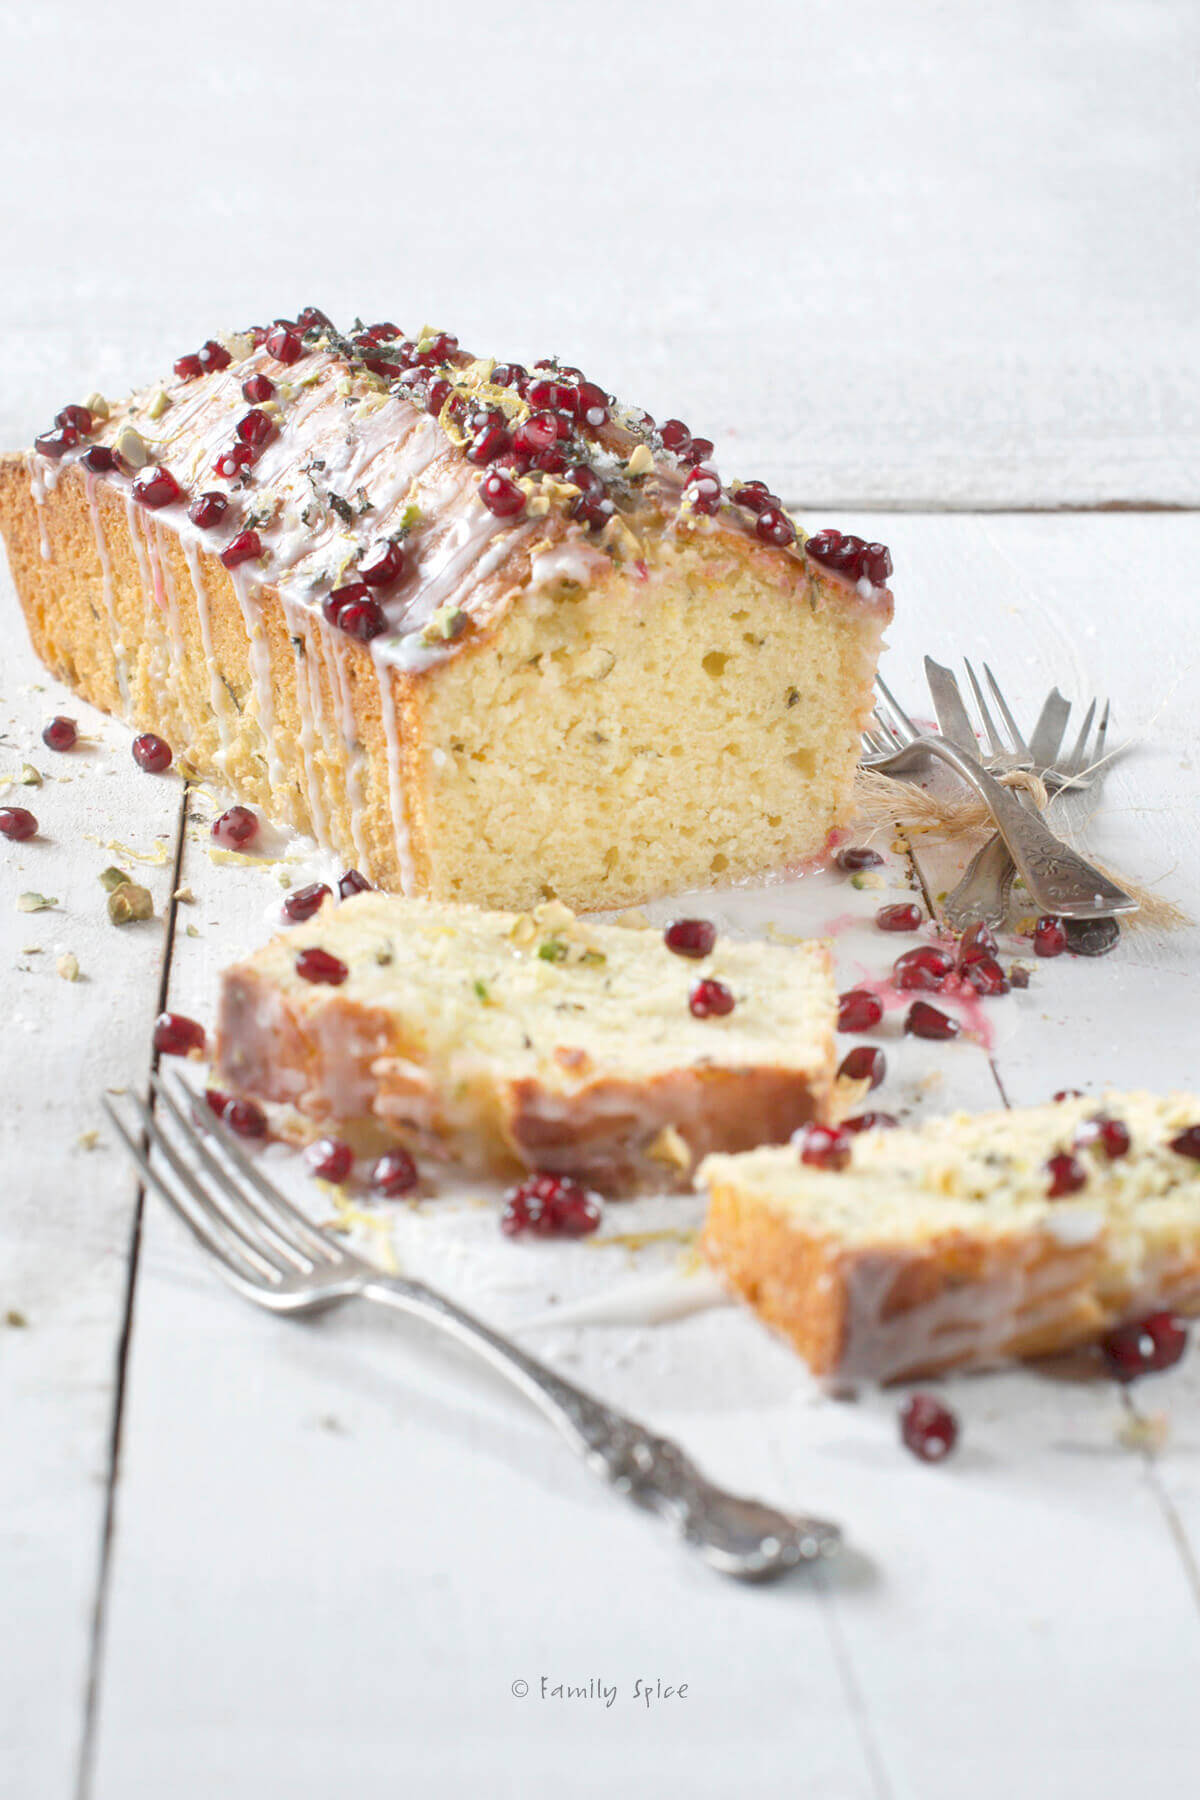 An olive oil lemon cake baked in a loaf pan and garnished with pistachios and pomegranate arils